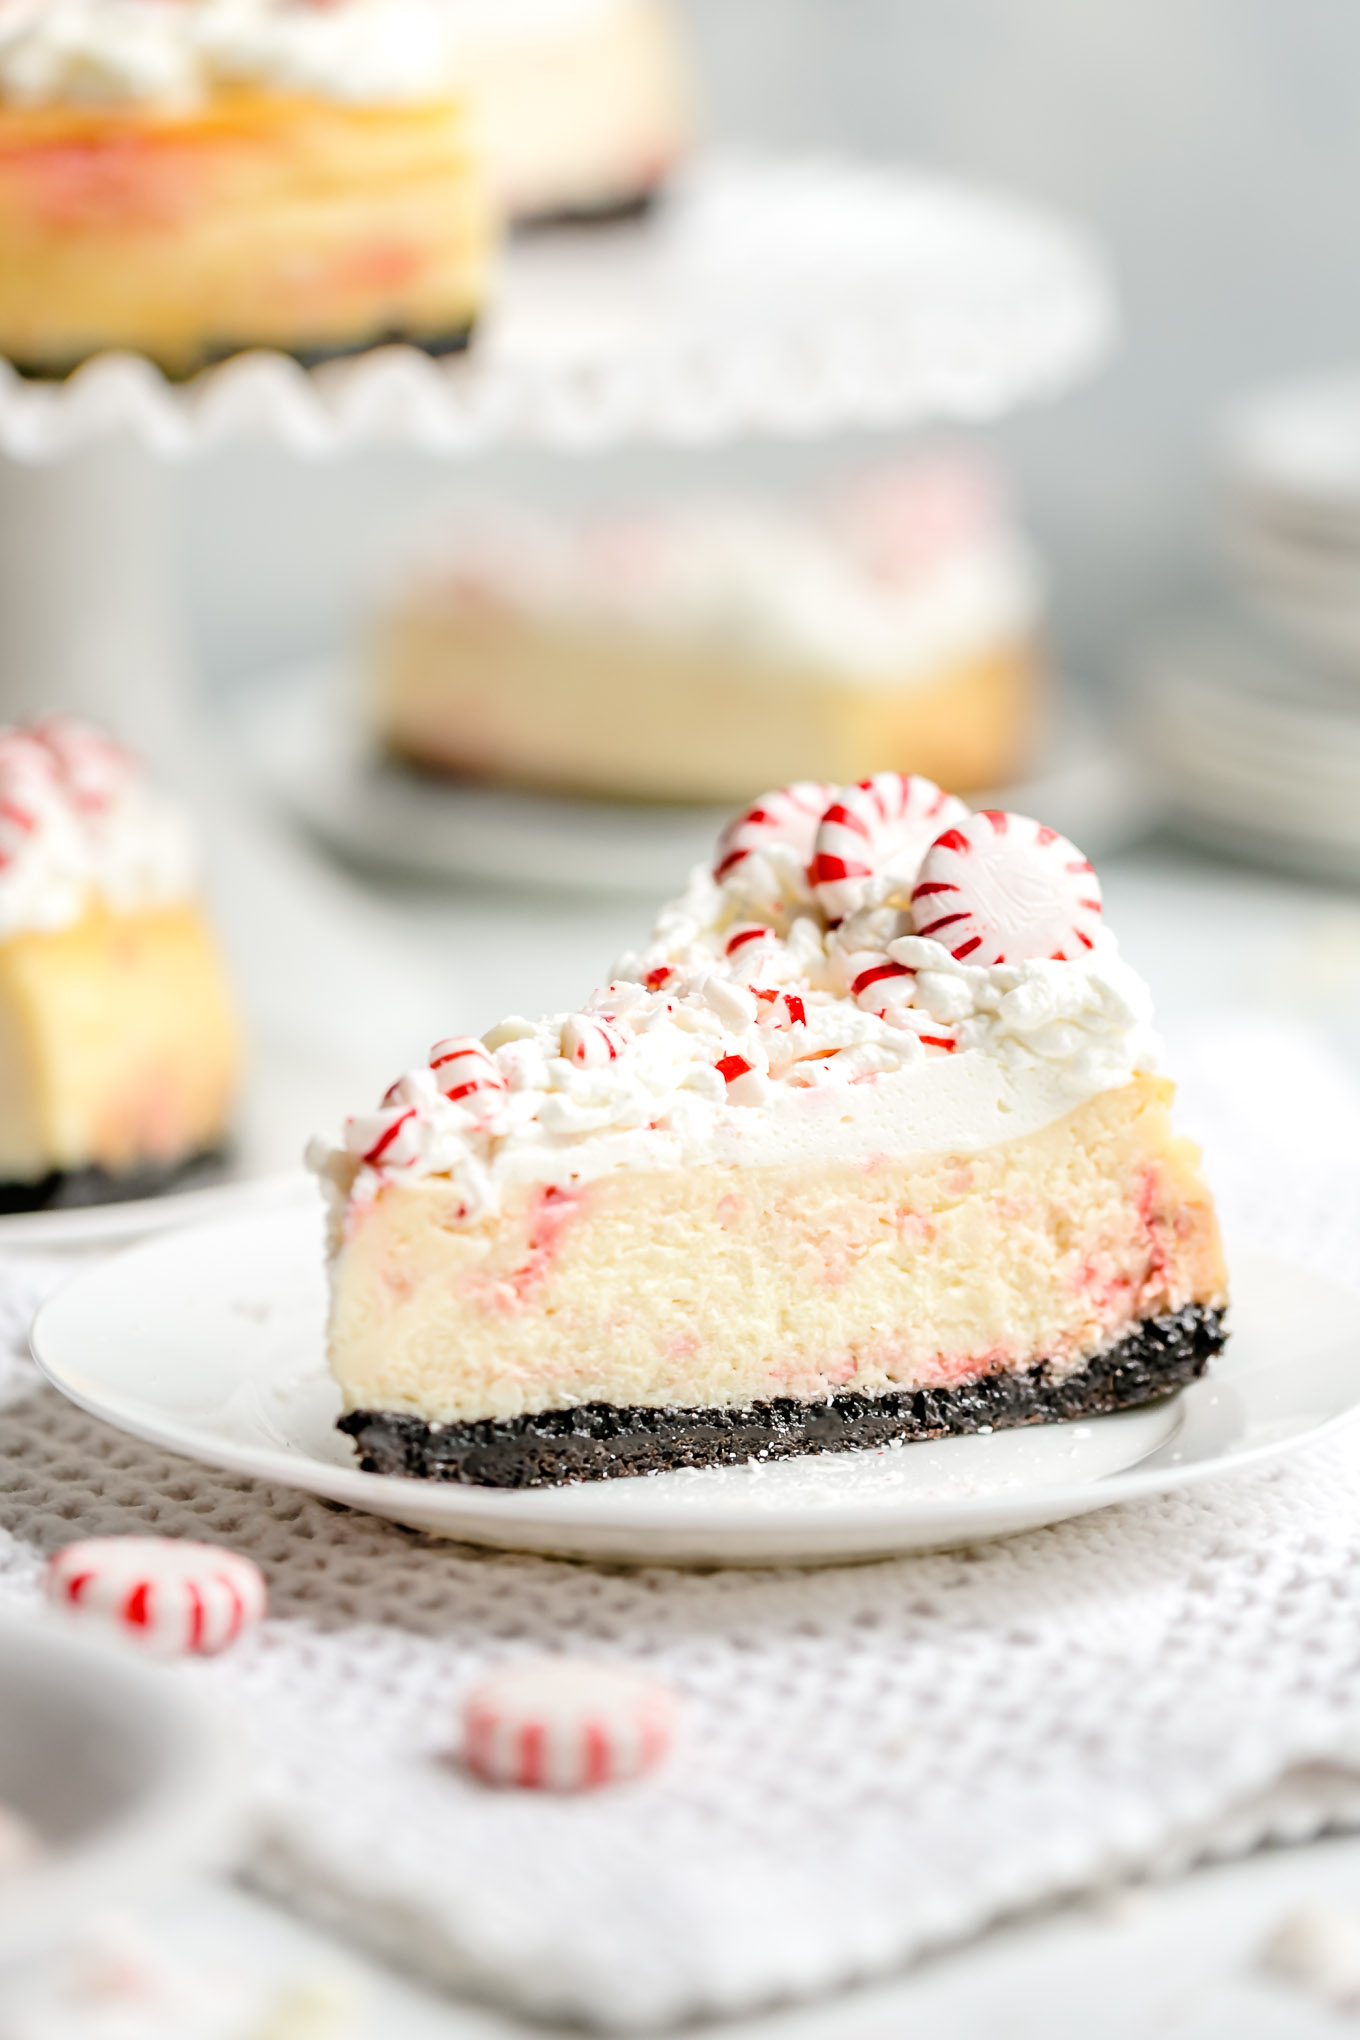 White Chocolate Peppermint Cheesecake - Smooth and creamy white chocolate cheesecake infused with cool peppermint flavor, a substantial chocolate cookie crust, and a cloud cover of whipped cream make this cheesecake recipe the holiday season's best, most beautiful dessert! 